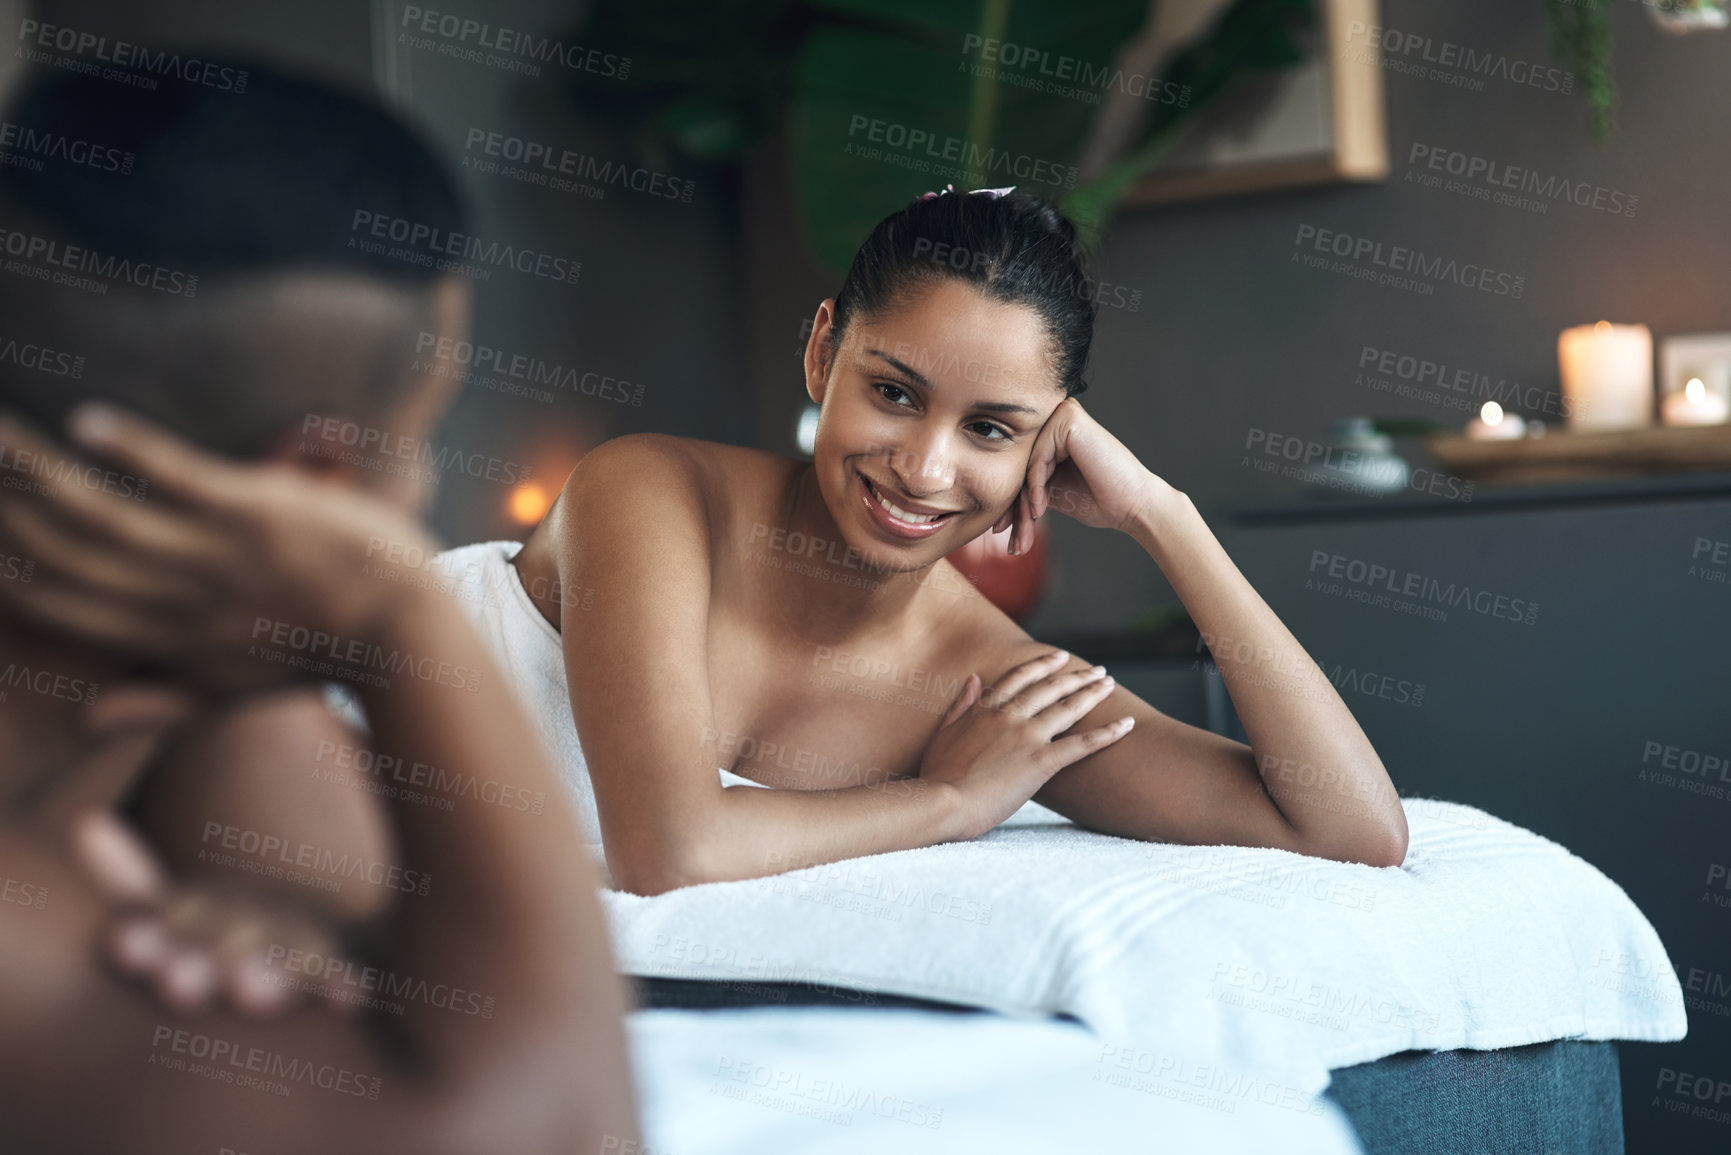 Buy stock photo Shot of a young couple relaxing on massage beds at a spa